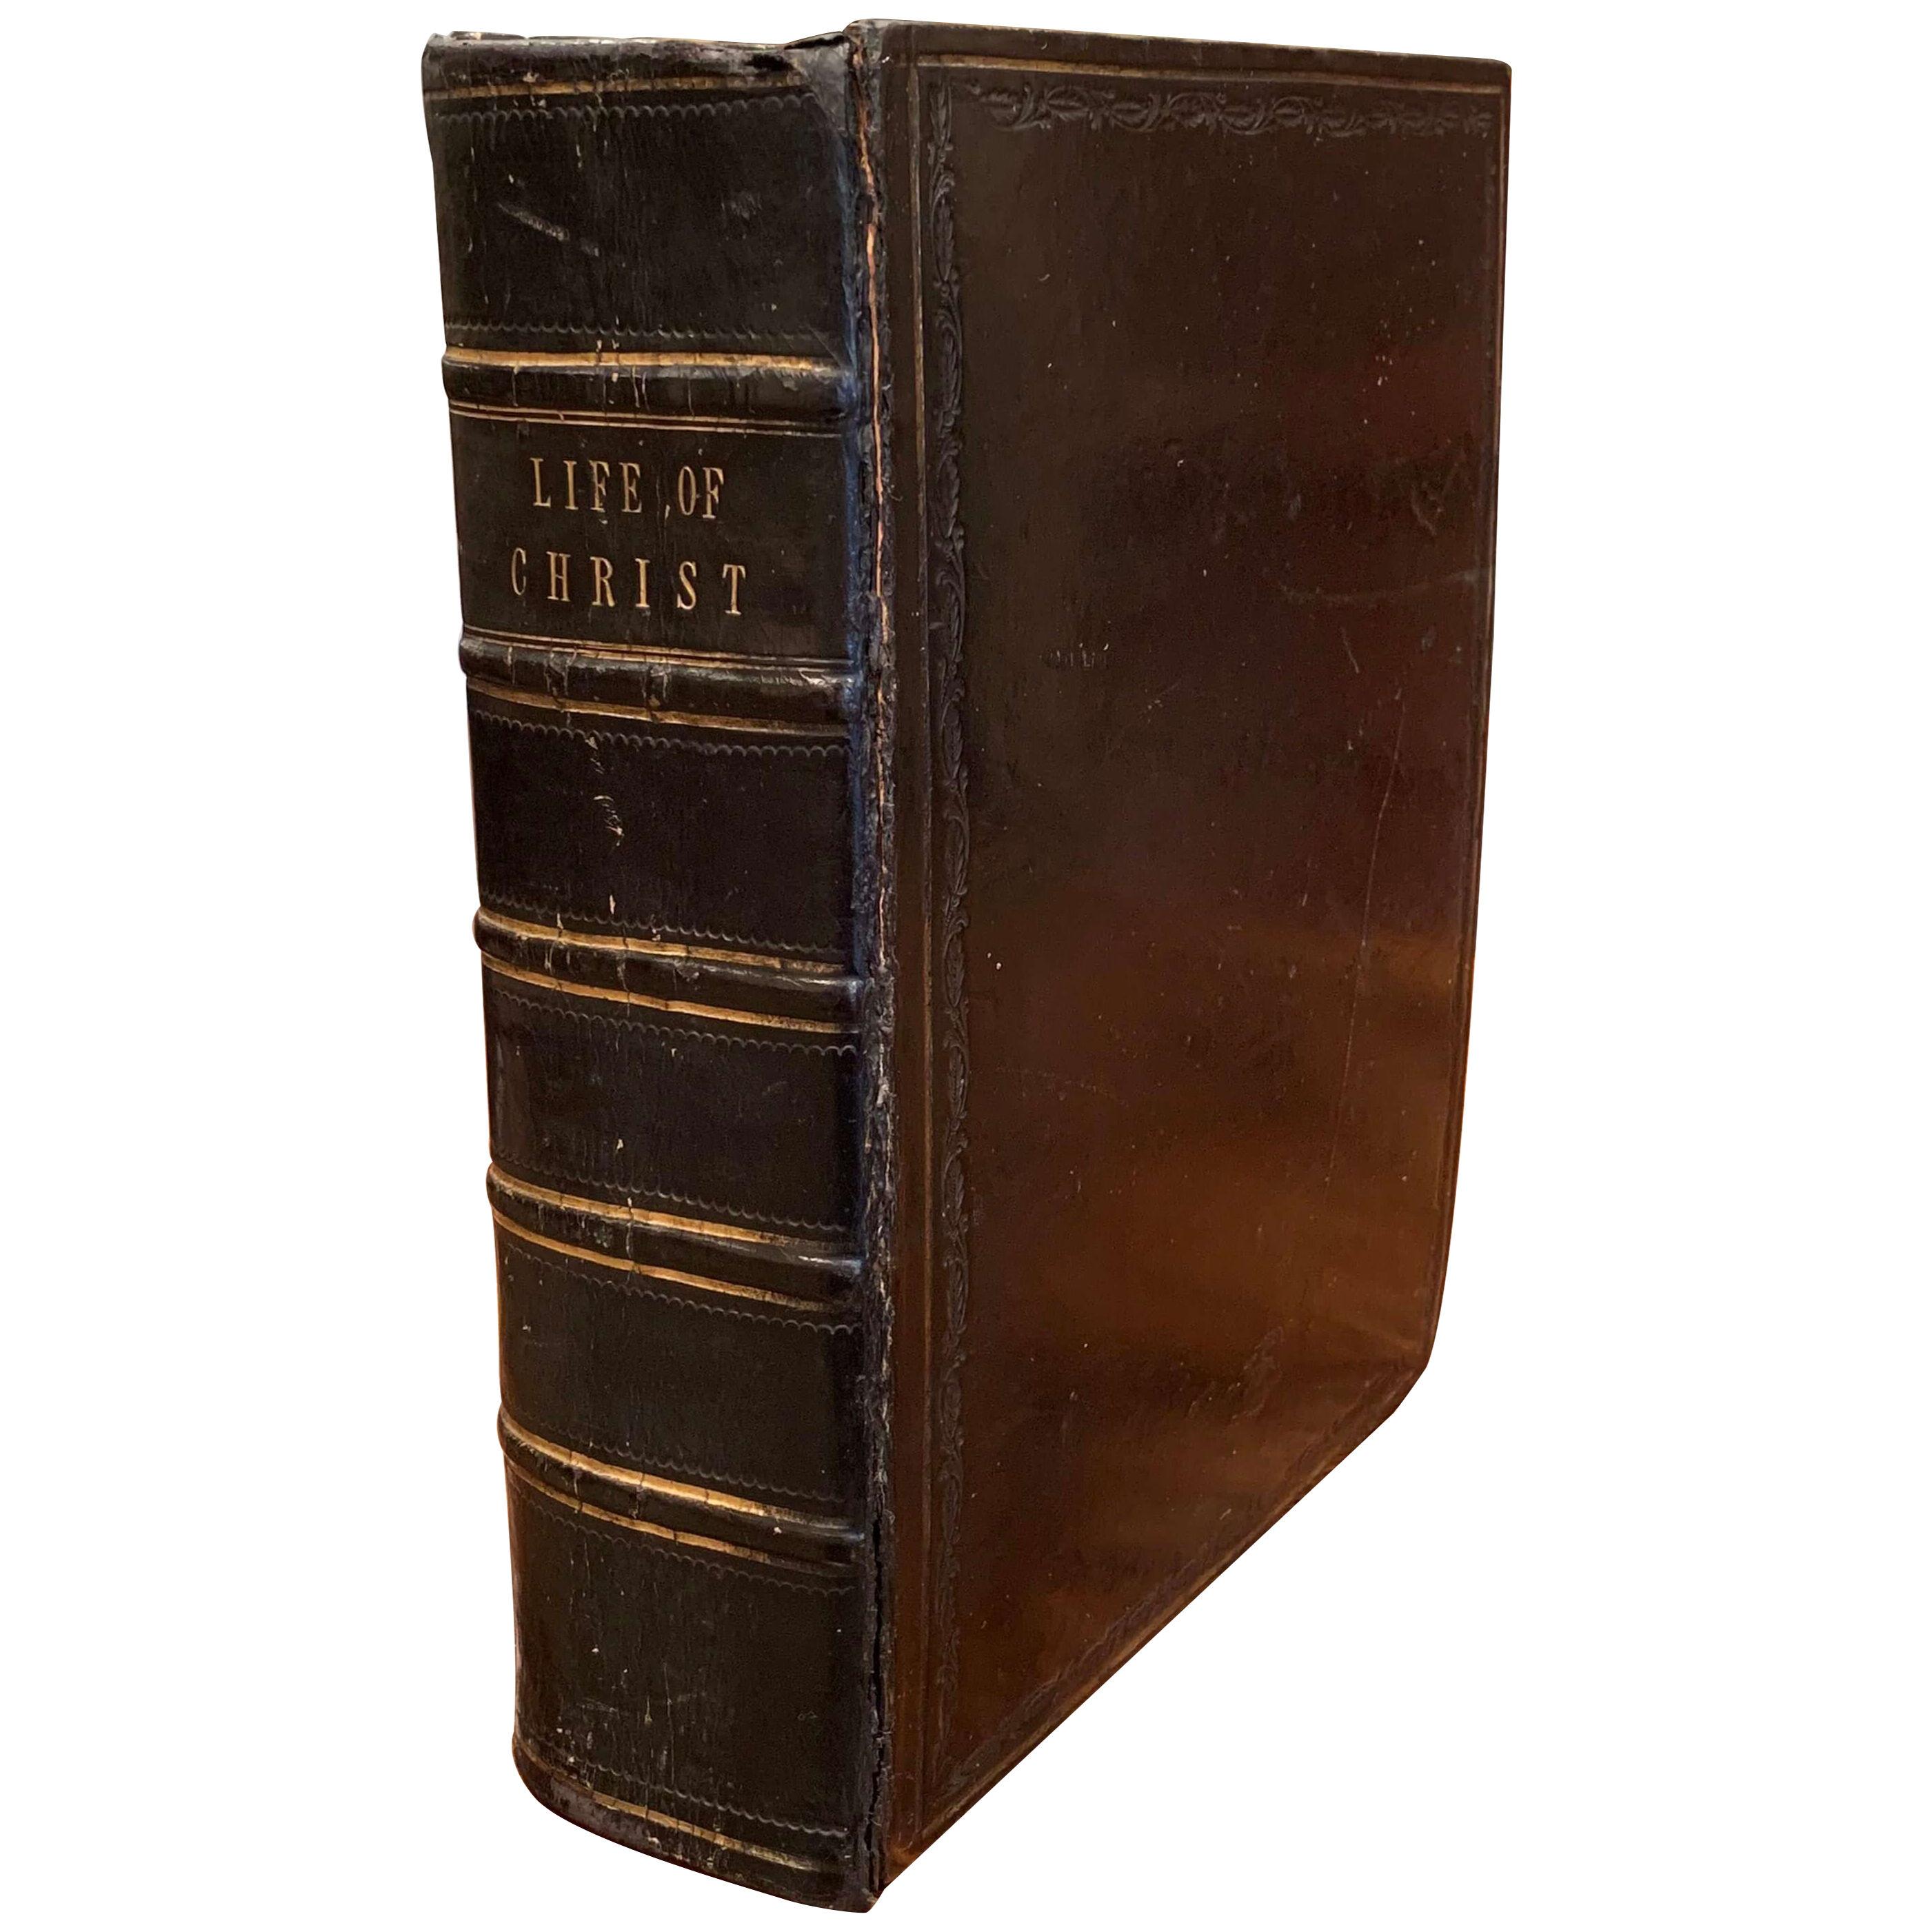 19th Century English Black Leather Bound with Gilt "Life of Christ" Dated 1857